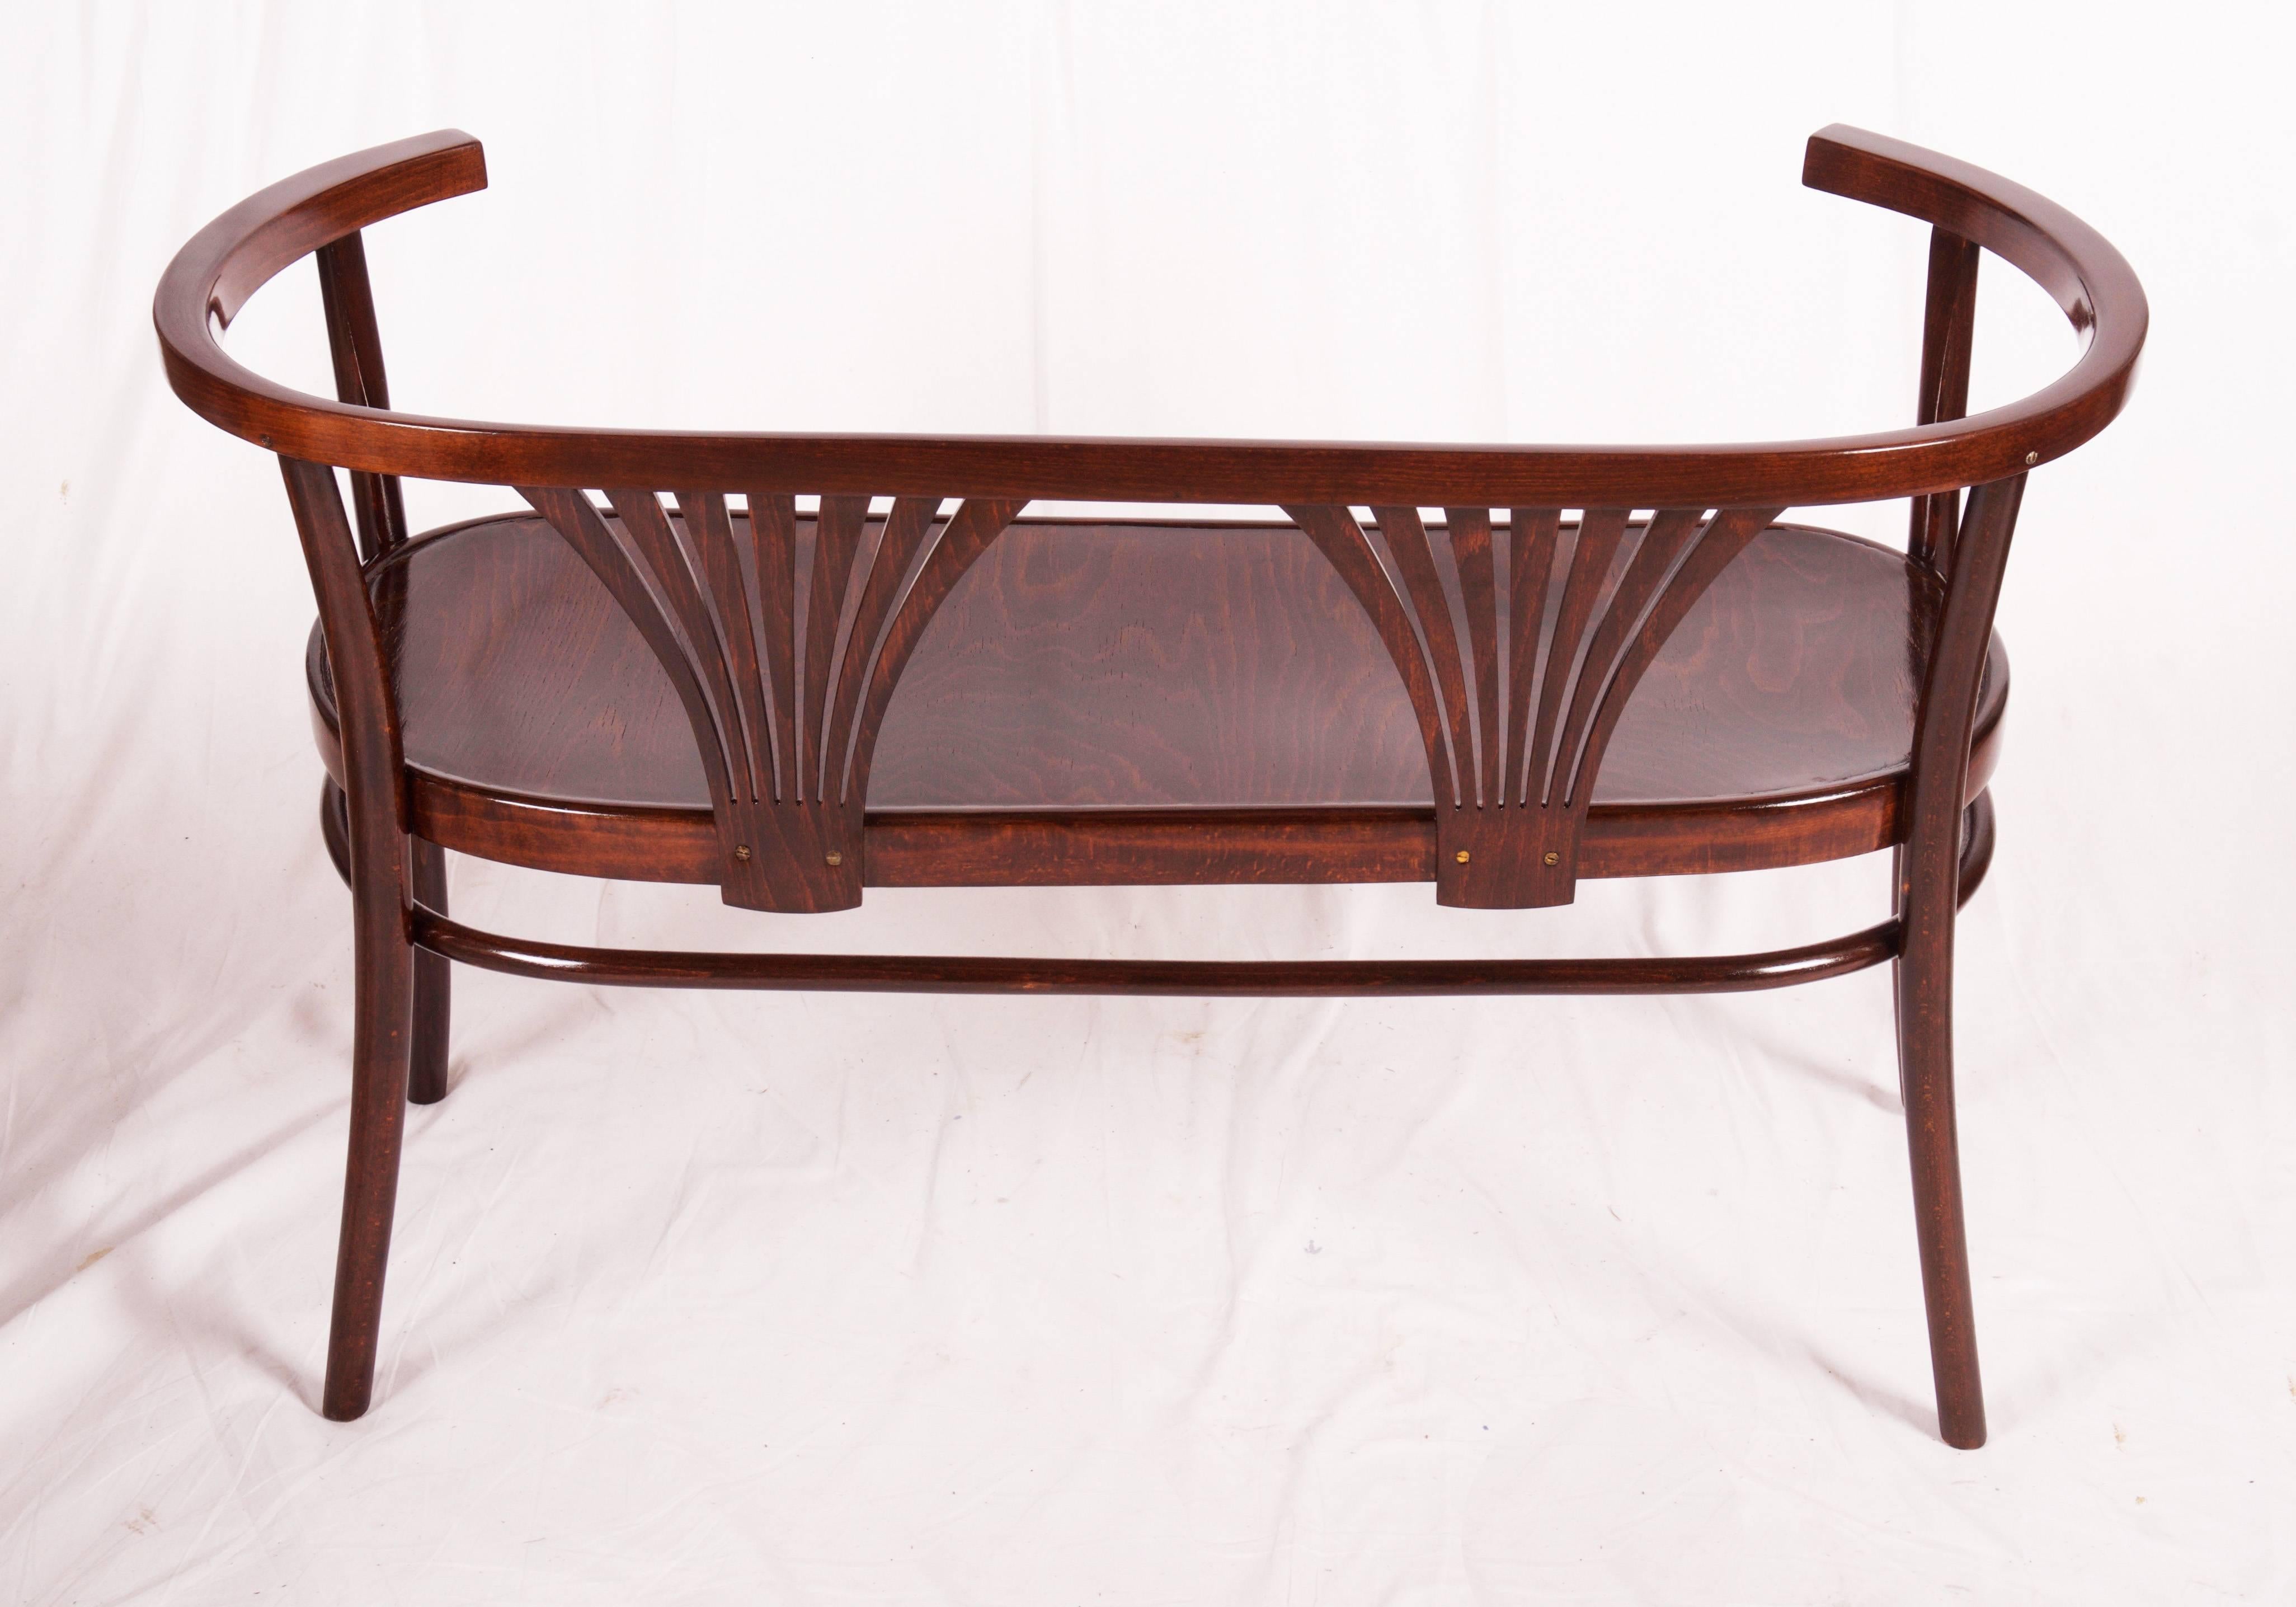 Early 20th Century Thonet Bentwood Settee, circa 1900